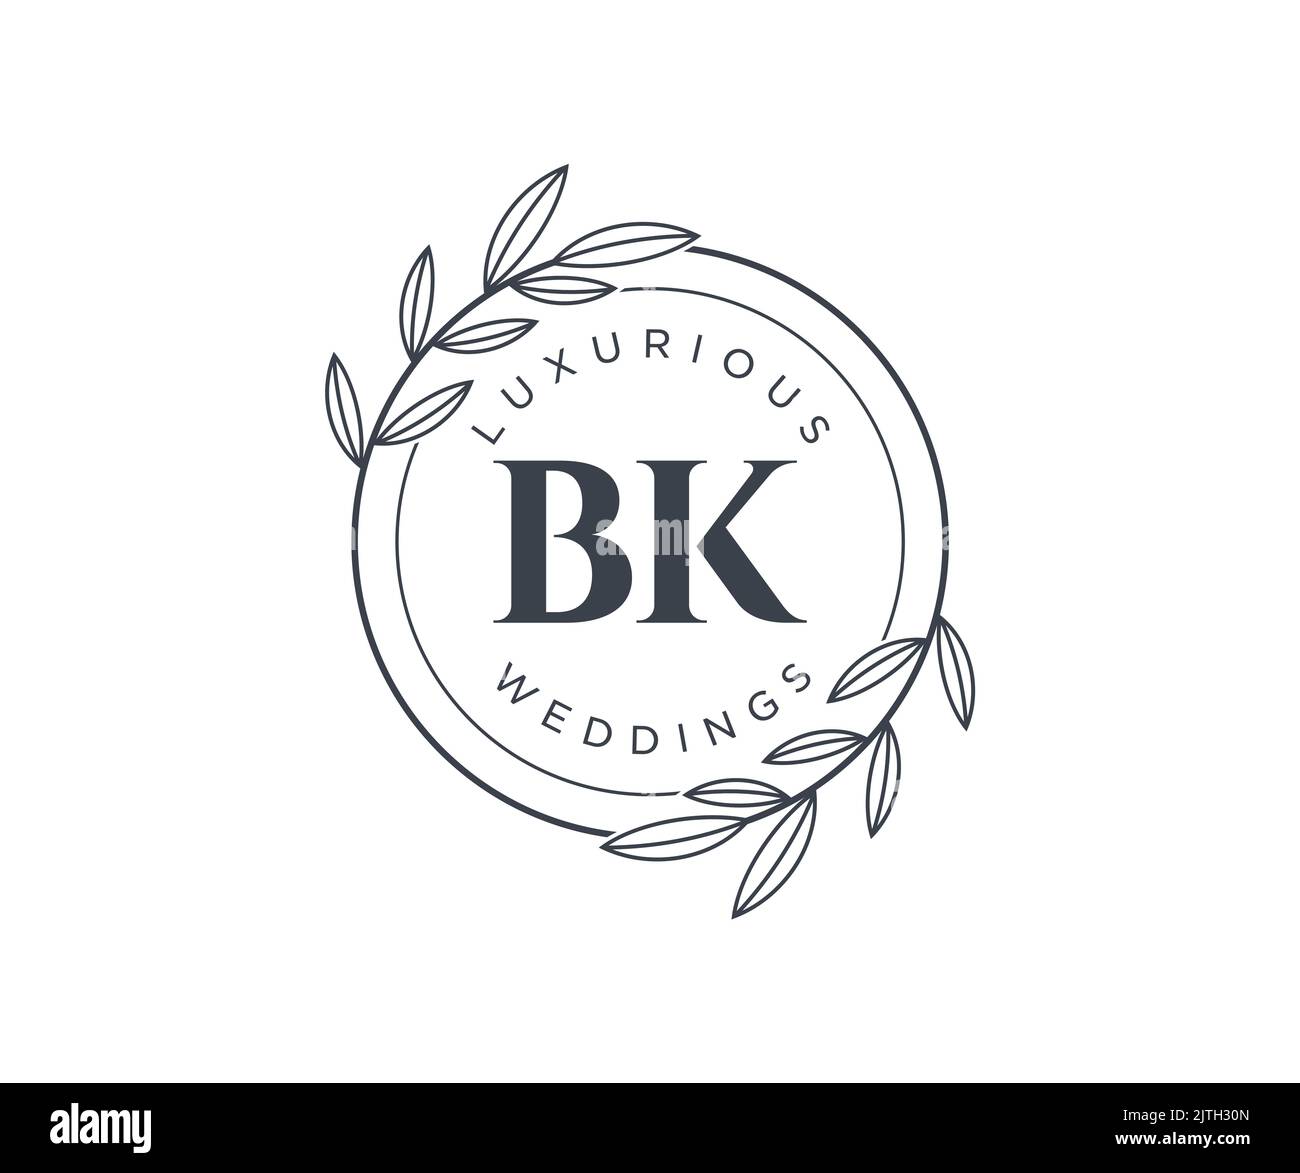 BK Initials letter Wedding monogram logos template, hand drawn modern minimalistic and floral templates for Invitation cards, Save the Date, elegant Stock Vector